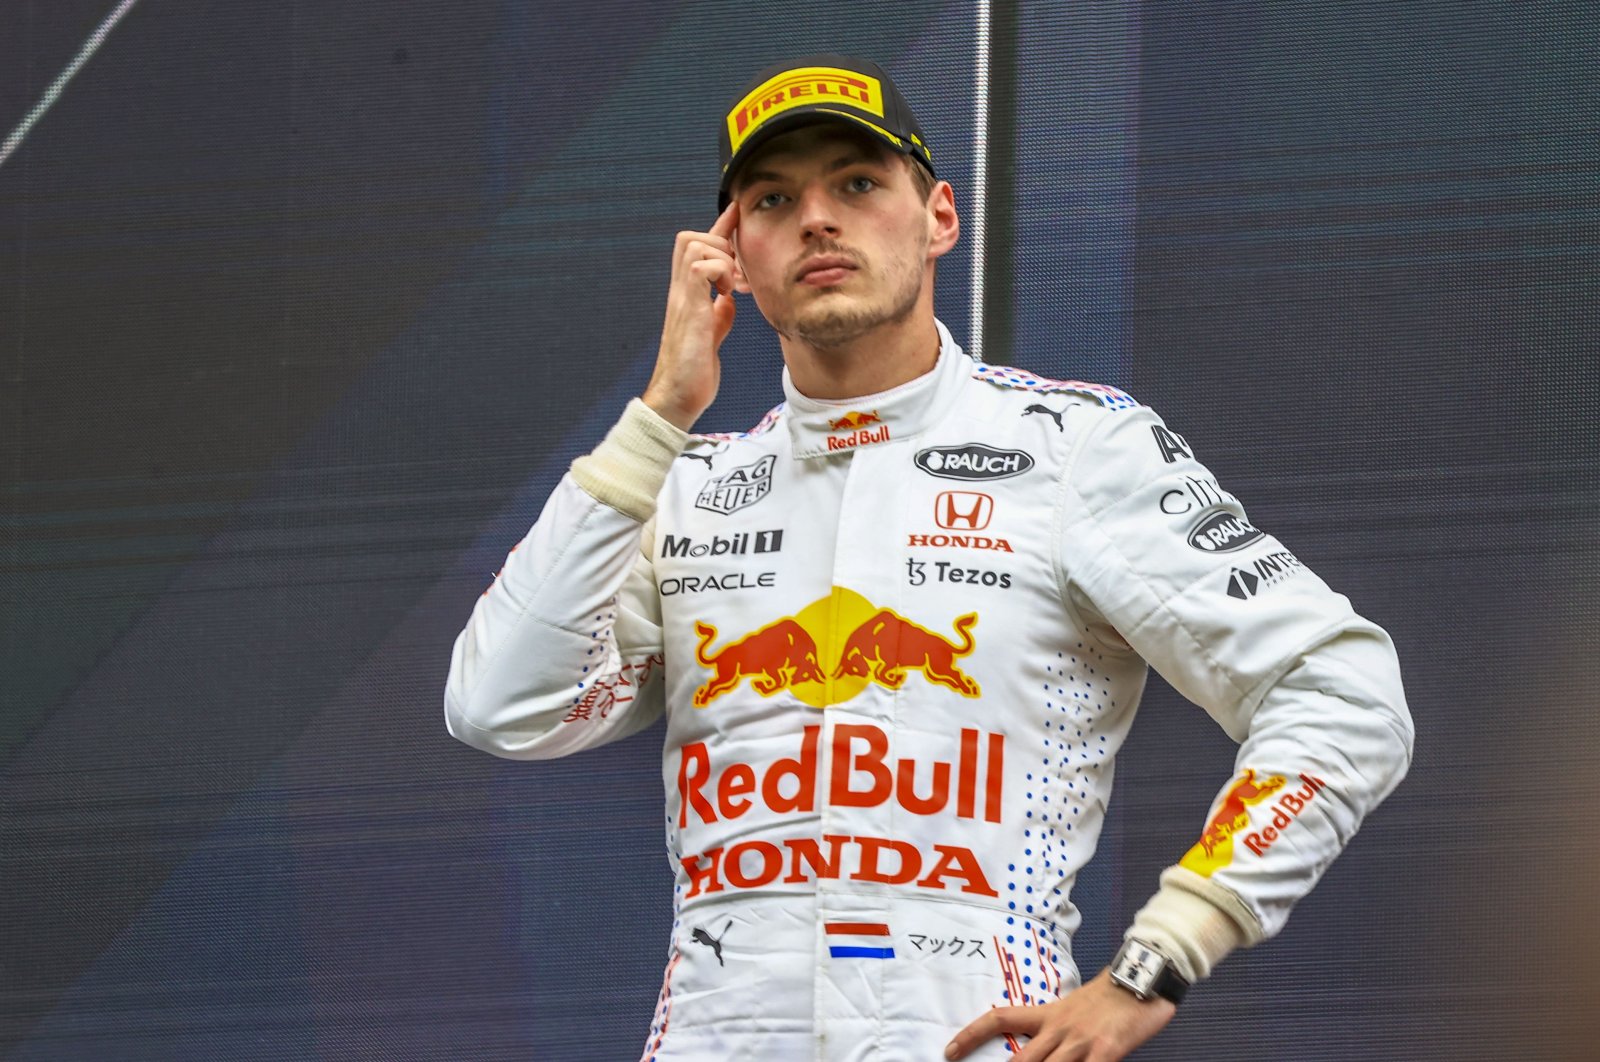 Red Bull driver Max Verstappen reacts after the F1 Turkish Grand Prix at the Istanbul Park circuit, in Istanbul, Turkey, Oct. 10, 2021. (AA Photo)